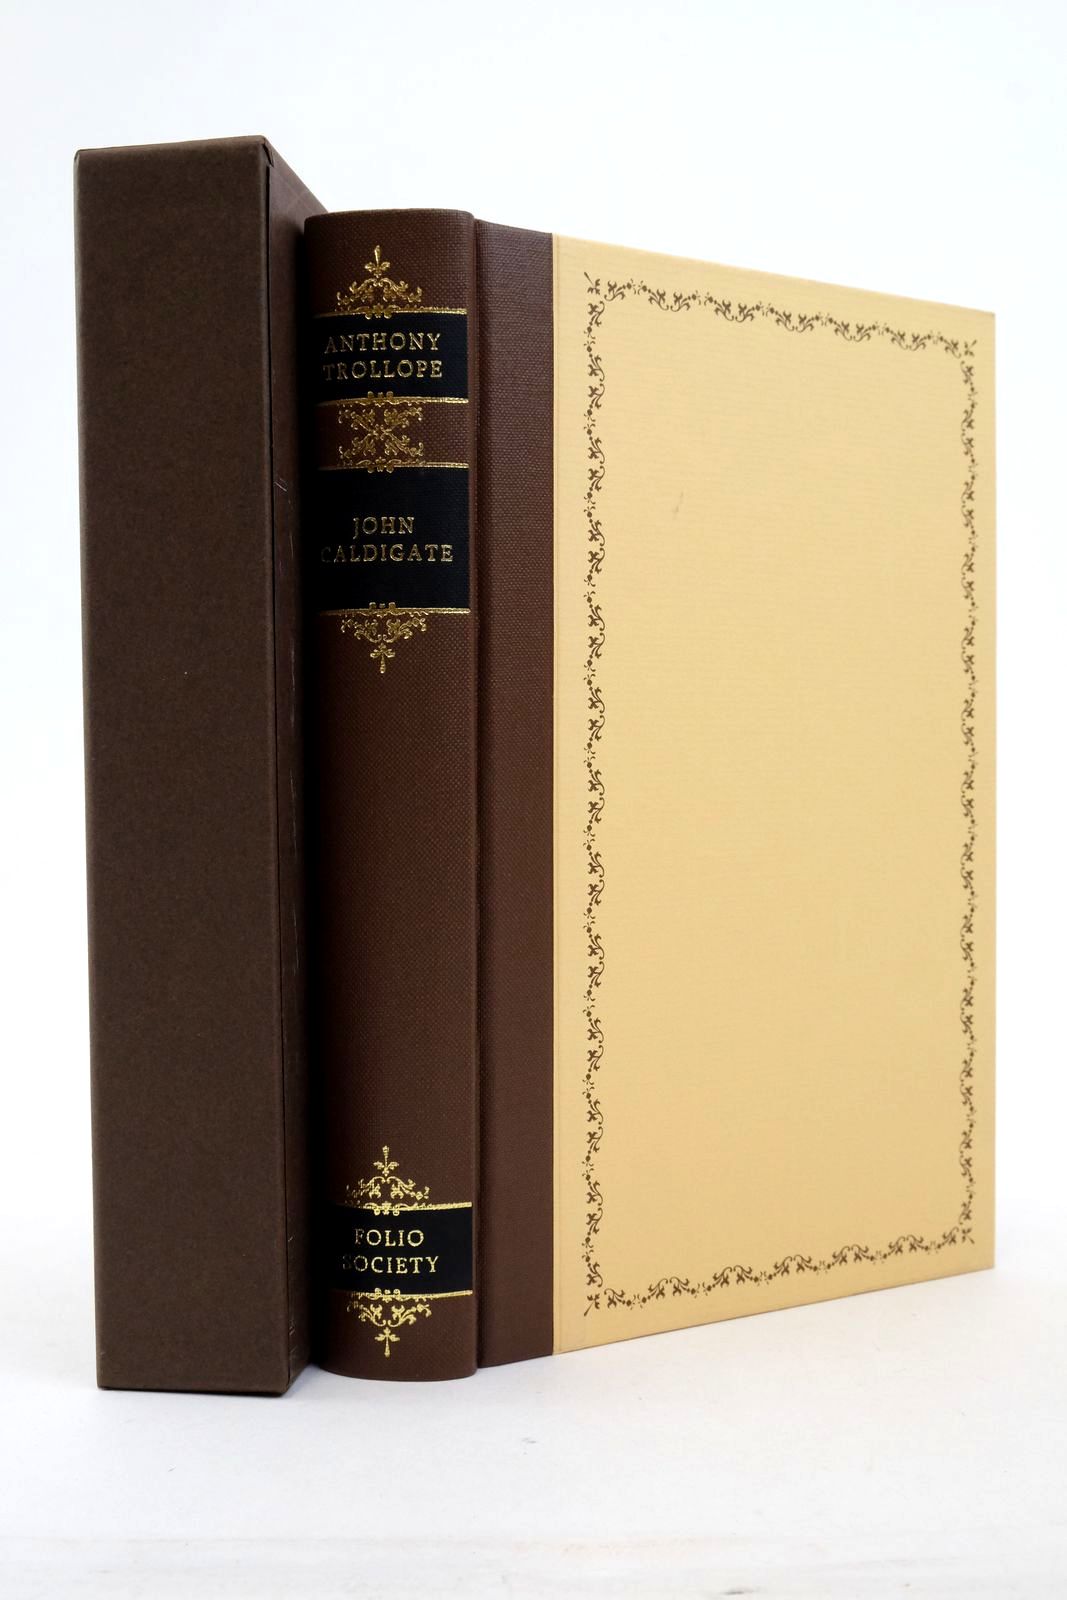 Photo of JOHN CALDIGATE written by Trollope, Anthony Terry, R.C. illustrated by Mosley, Francis published by Folio Society (STOCK CODE: 2138251)  for sale by Stella & Rose's Books